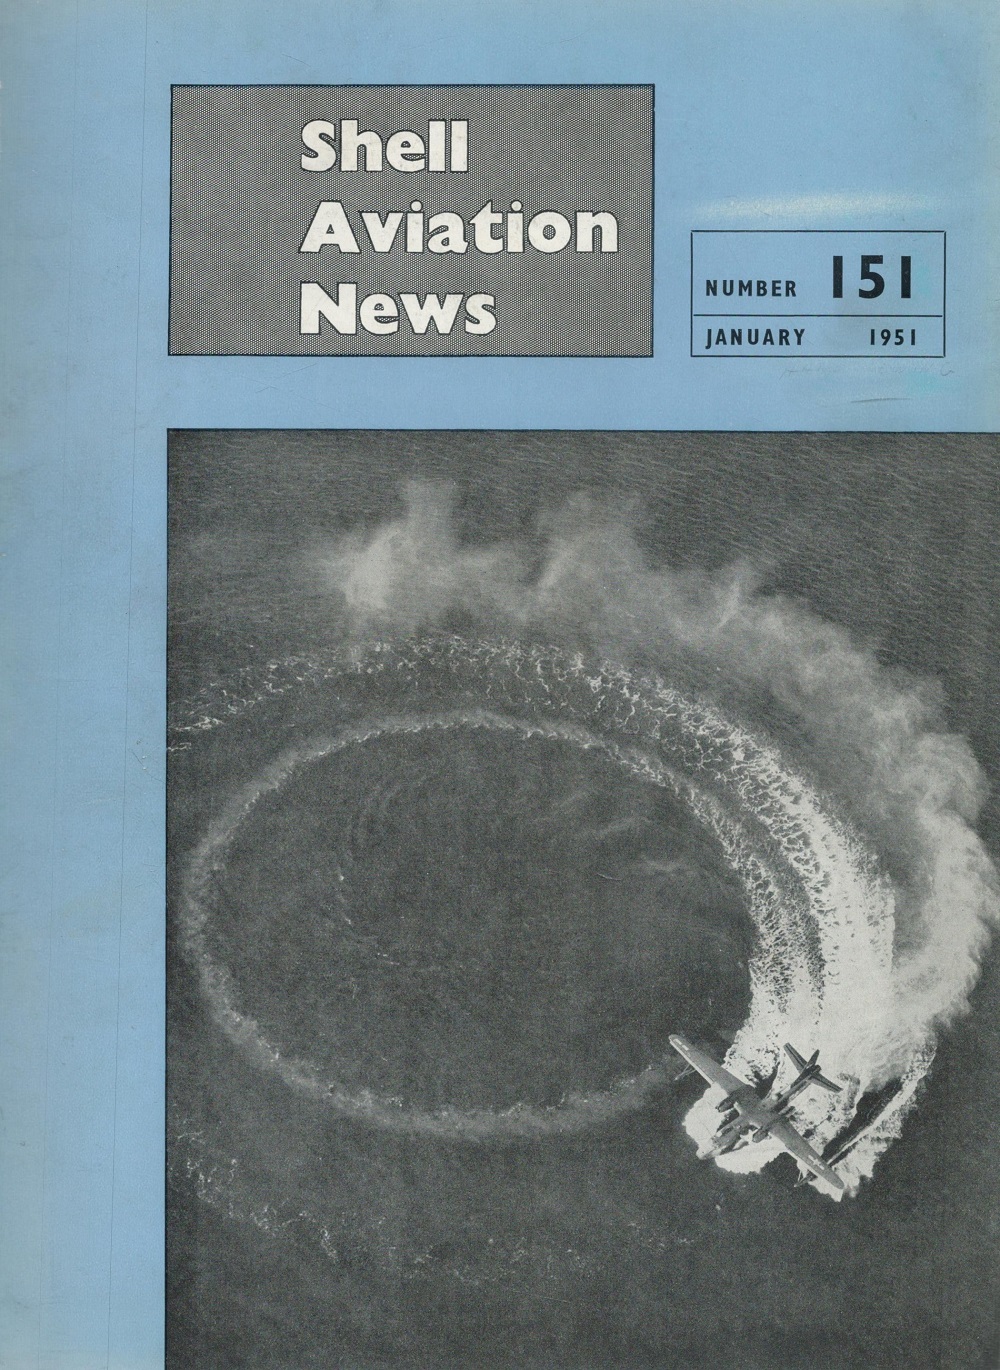 Shell Aviation News Jan 1951 to Dec 1952 and Jan to Dec 1953 unsigned Hardbacked Books Published - Image 4 of 4